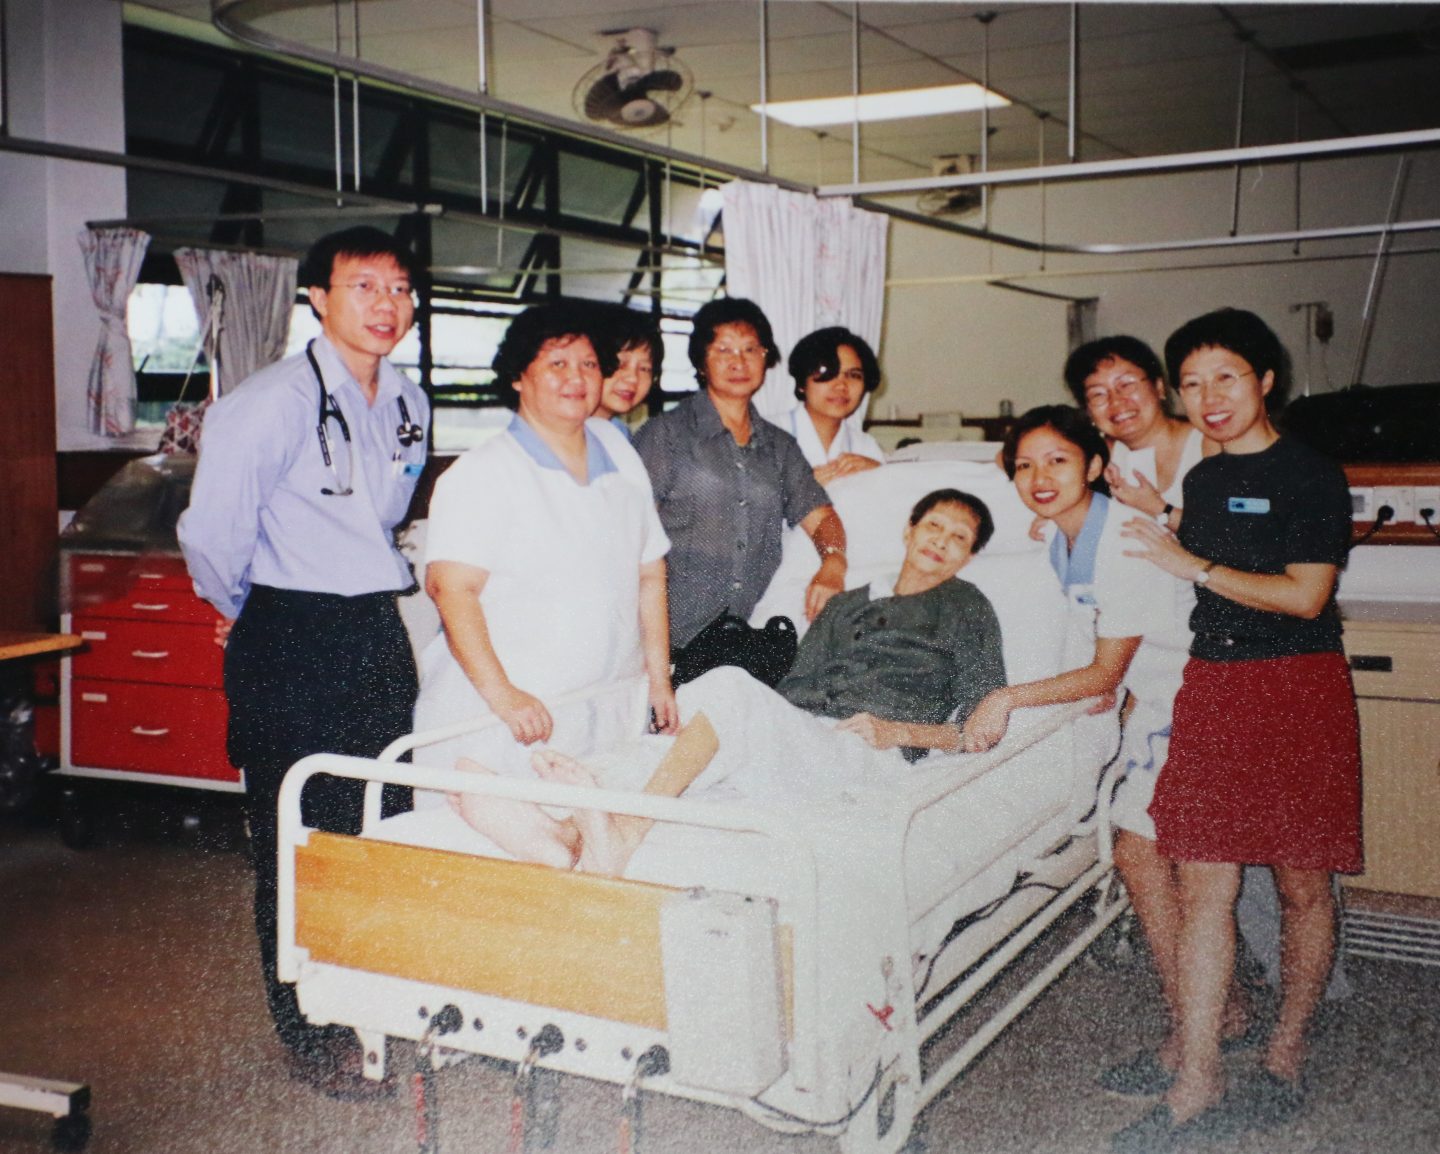 Tan Boon Yeow with staff and patient